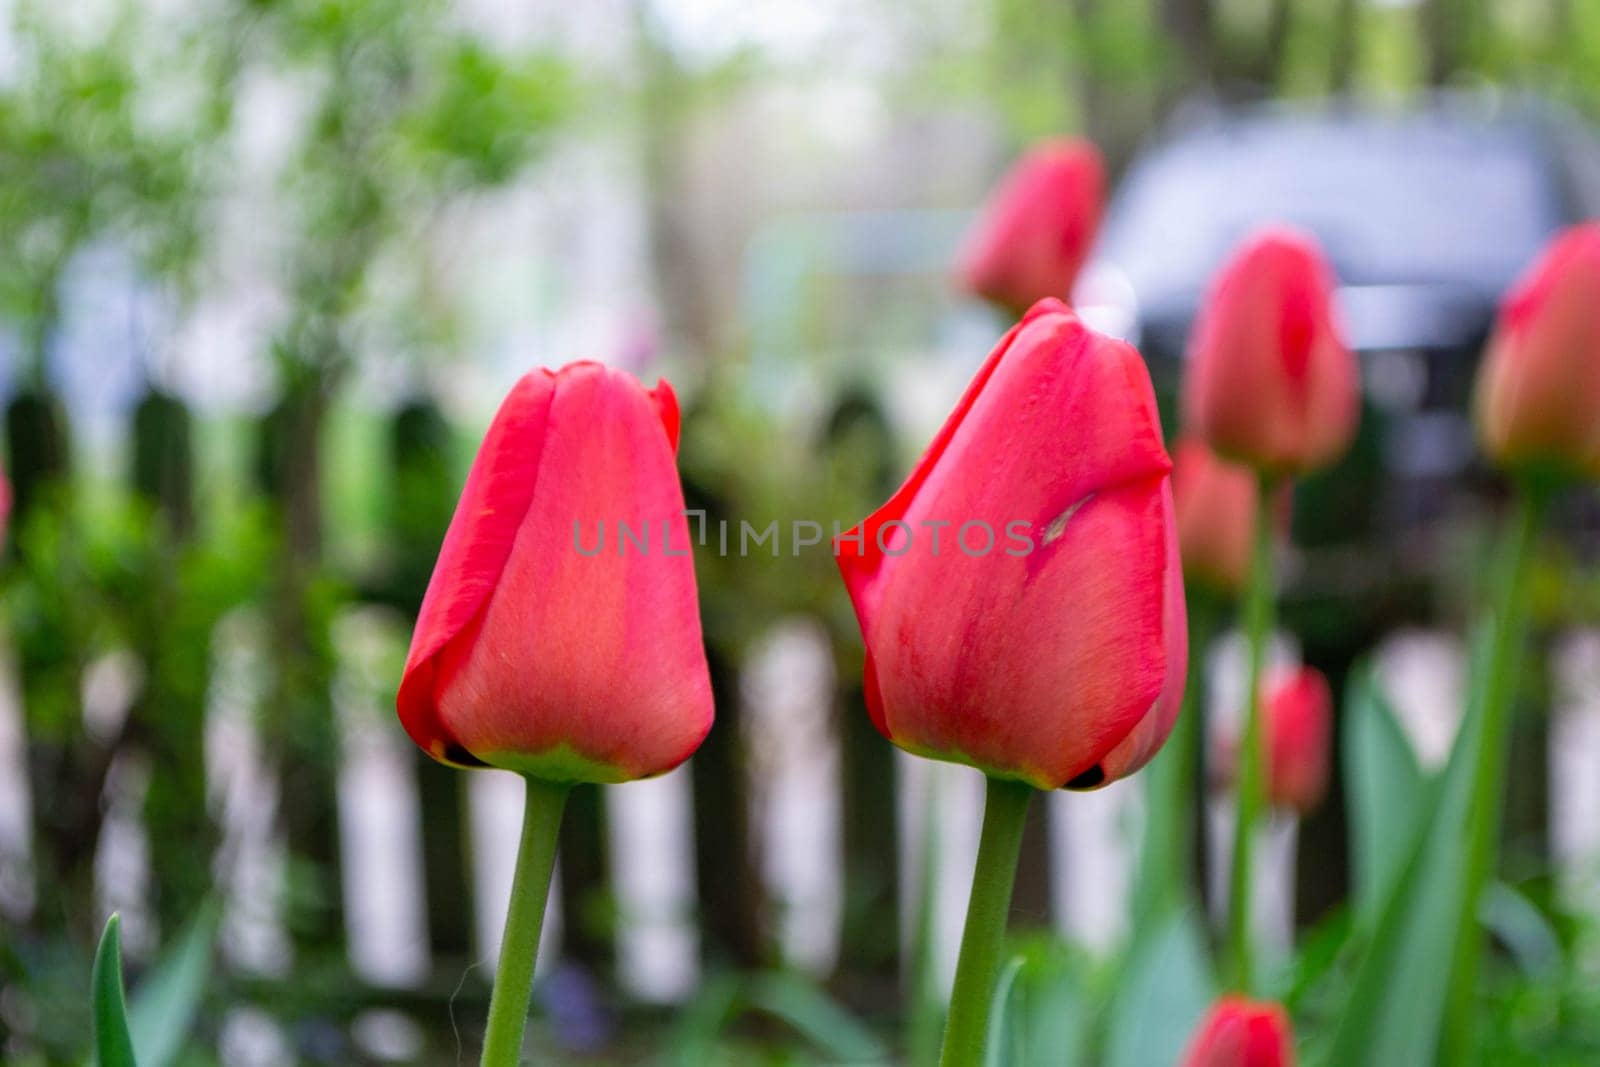 Spring Tulips in bloom with red and green colors by milastokerpro